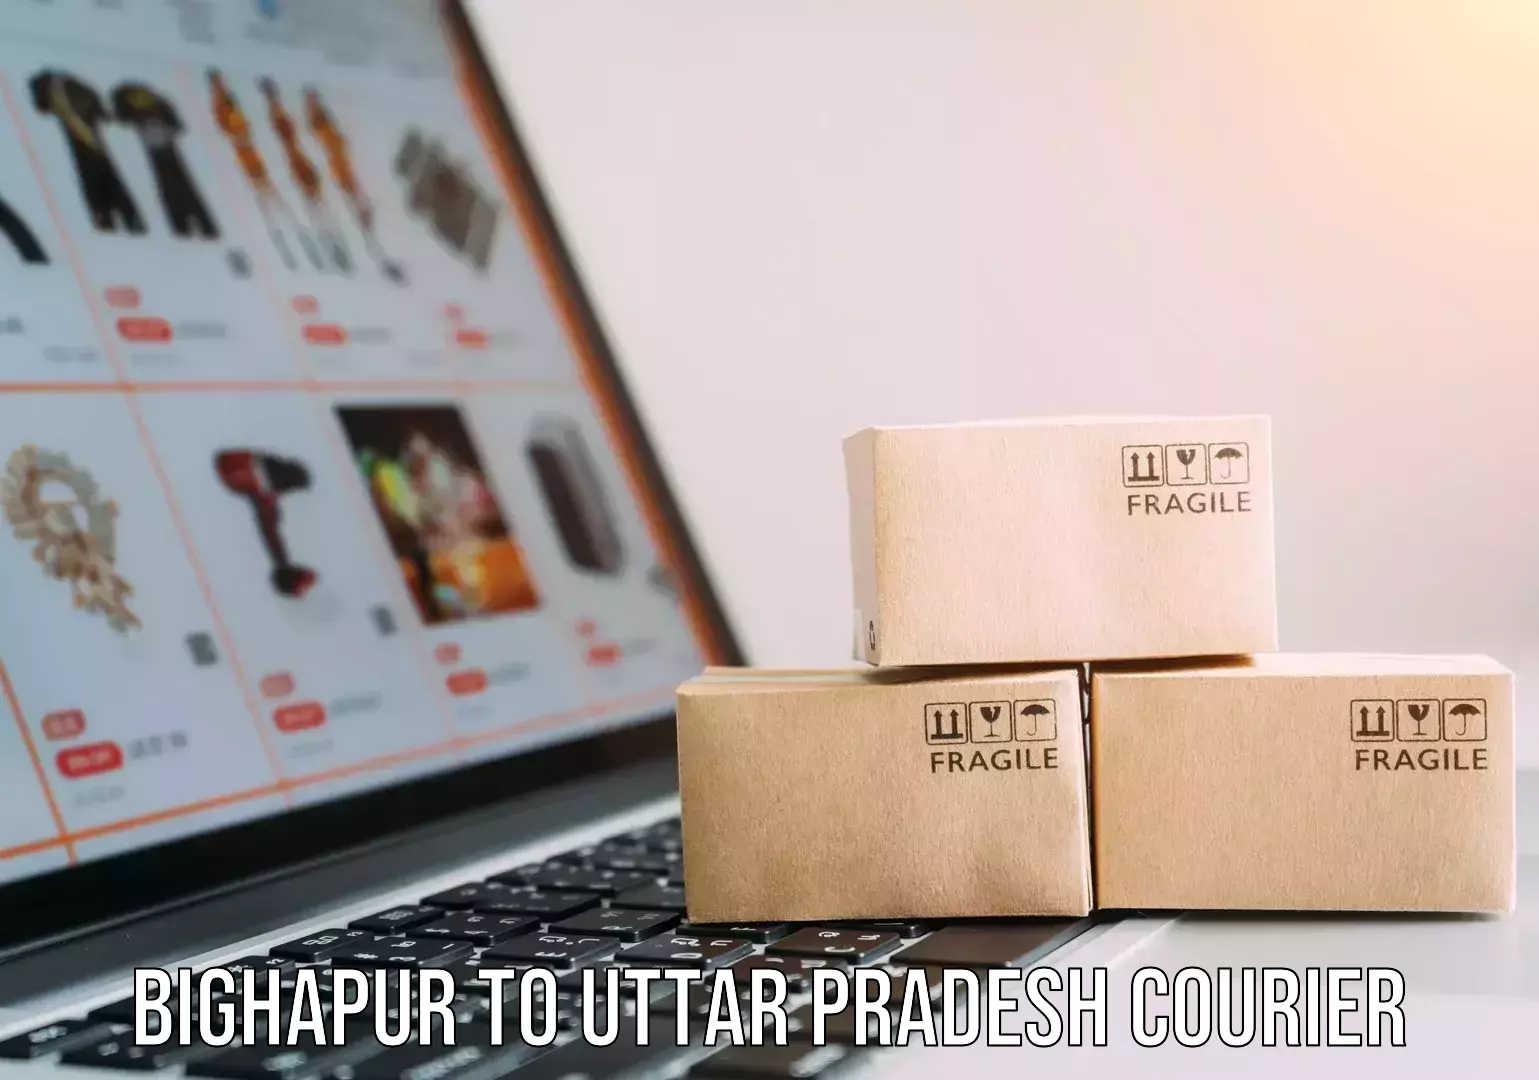 Efficient package consolidation Bighapur to Dohrighat